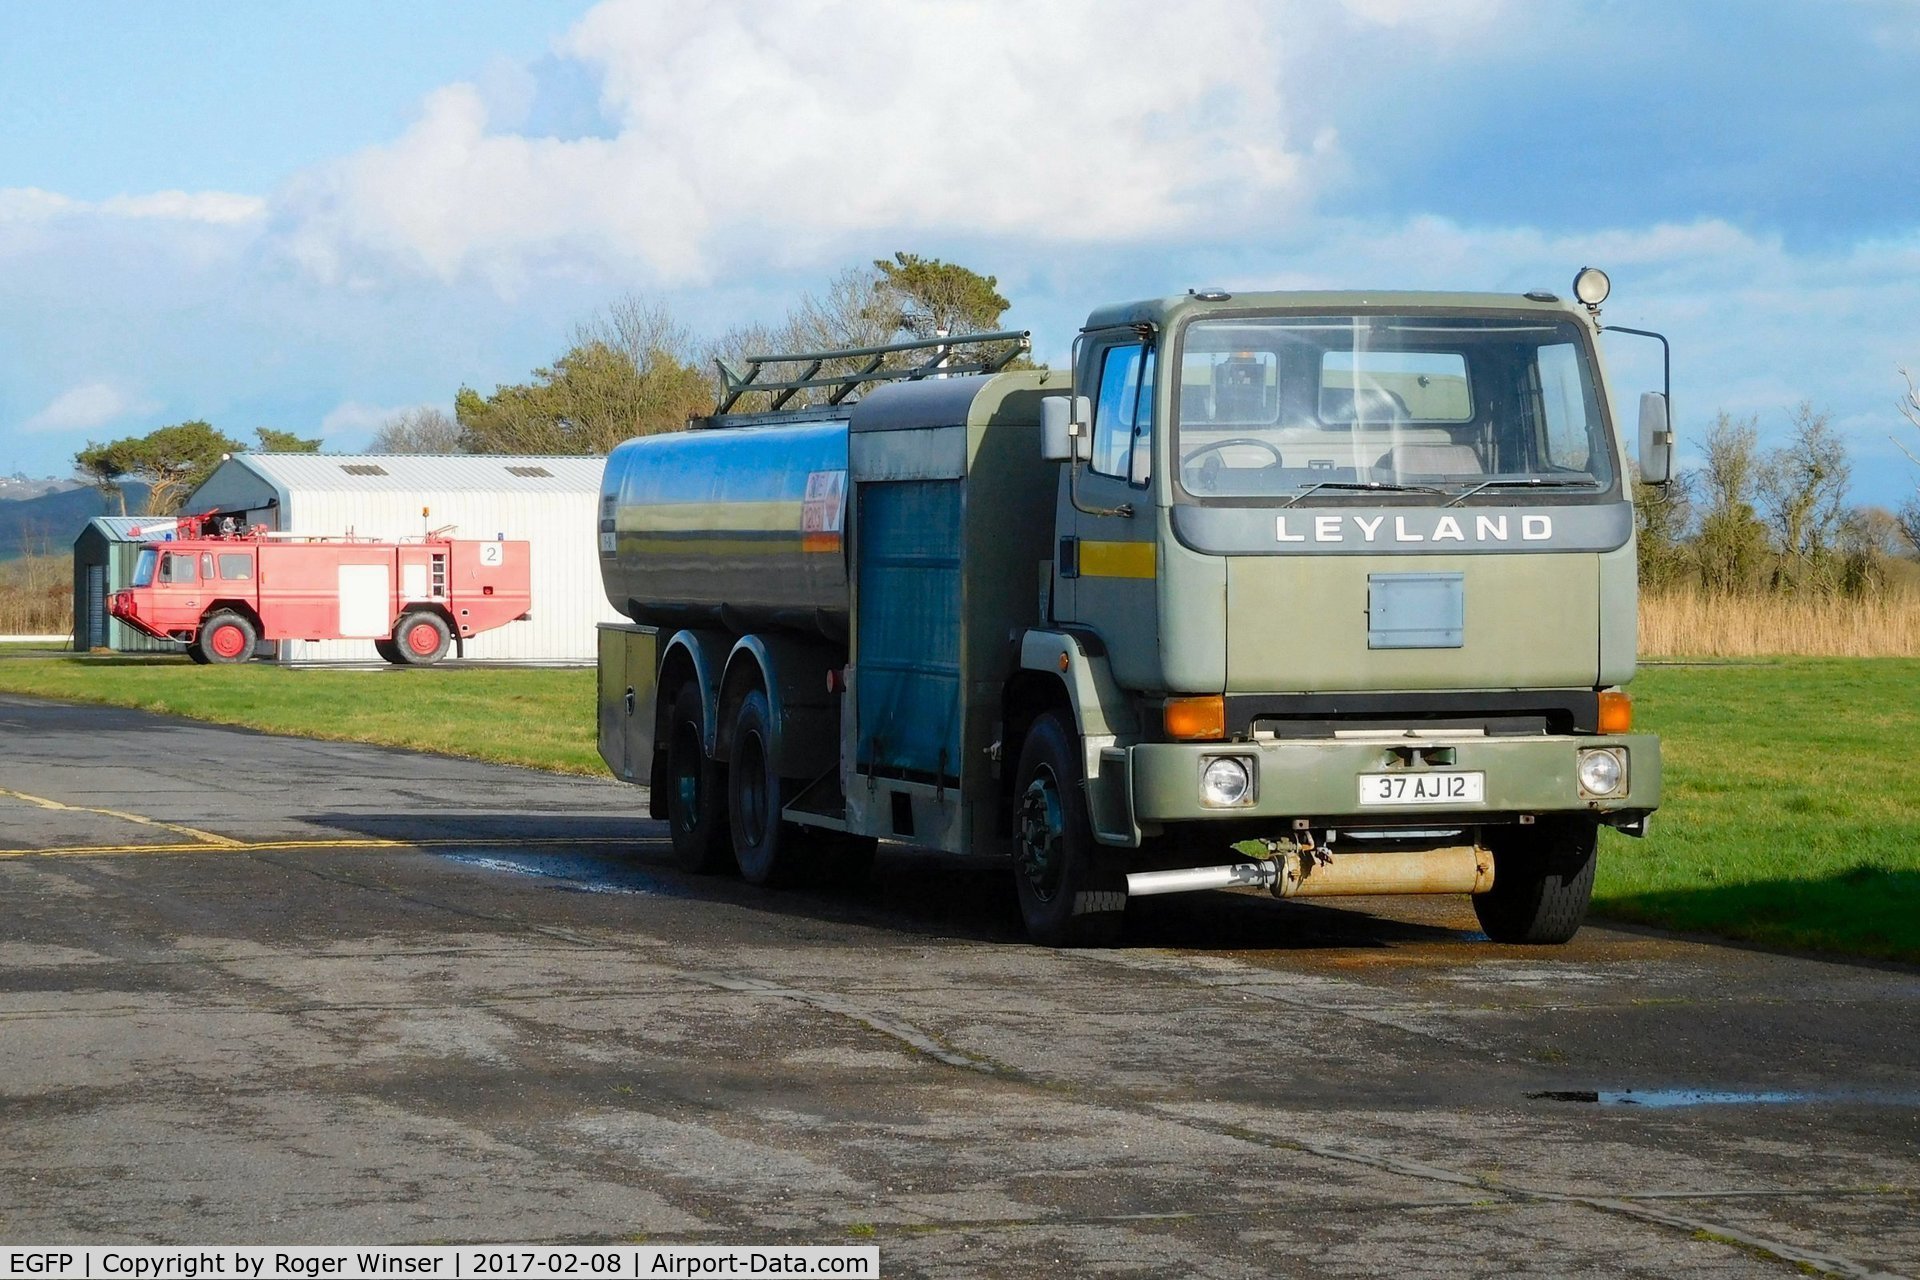 Pembrey Airport, Pembrey, Wales United Kingdom (EGFP) - The airport's Carmichael fire and resue tender No.2 and Leyland aviation fuel tanker.